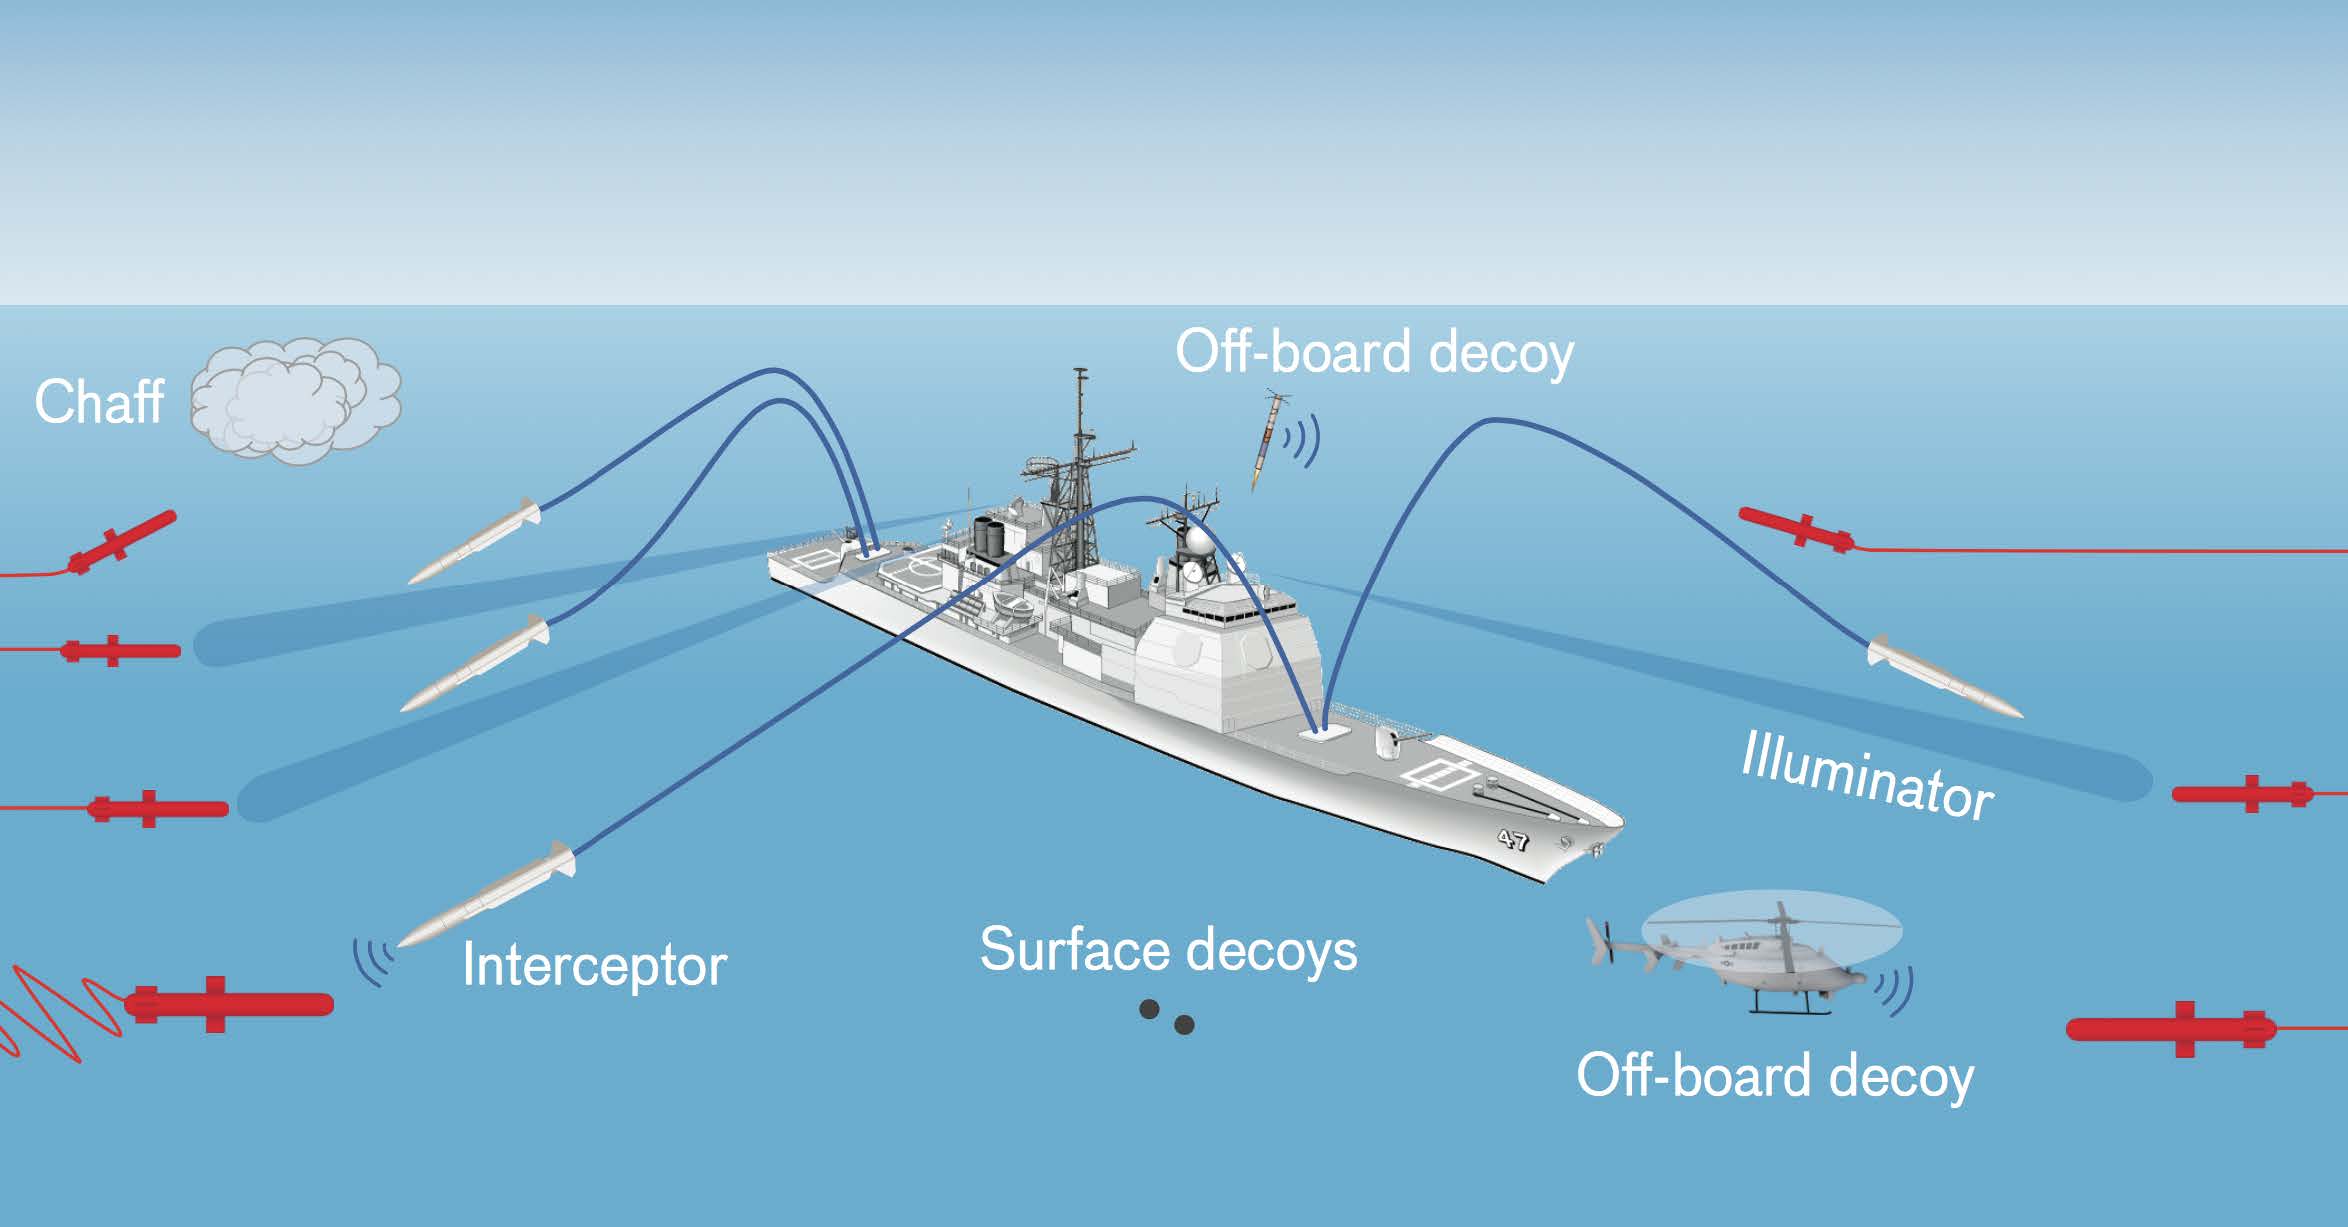 an illustration showing a navy ship in the ocean with several different kinds of missile interceptors and decoys being deployed